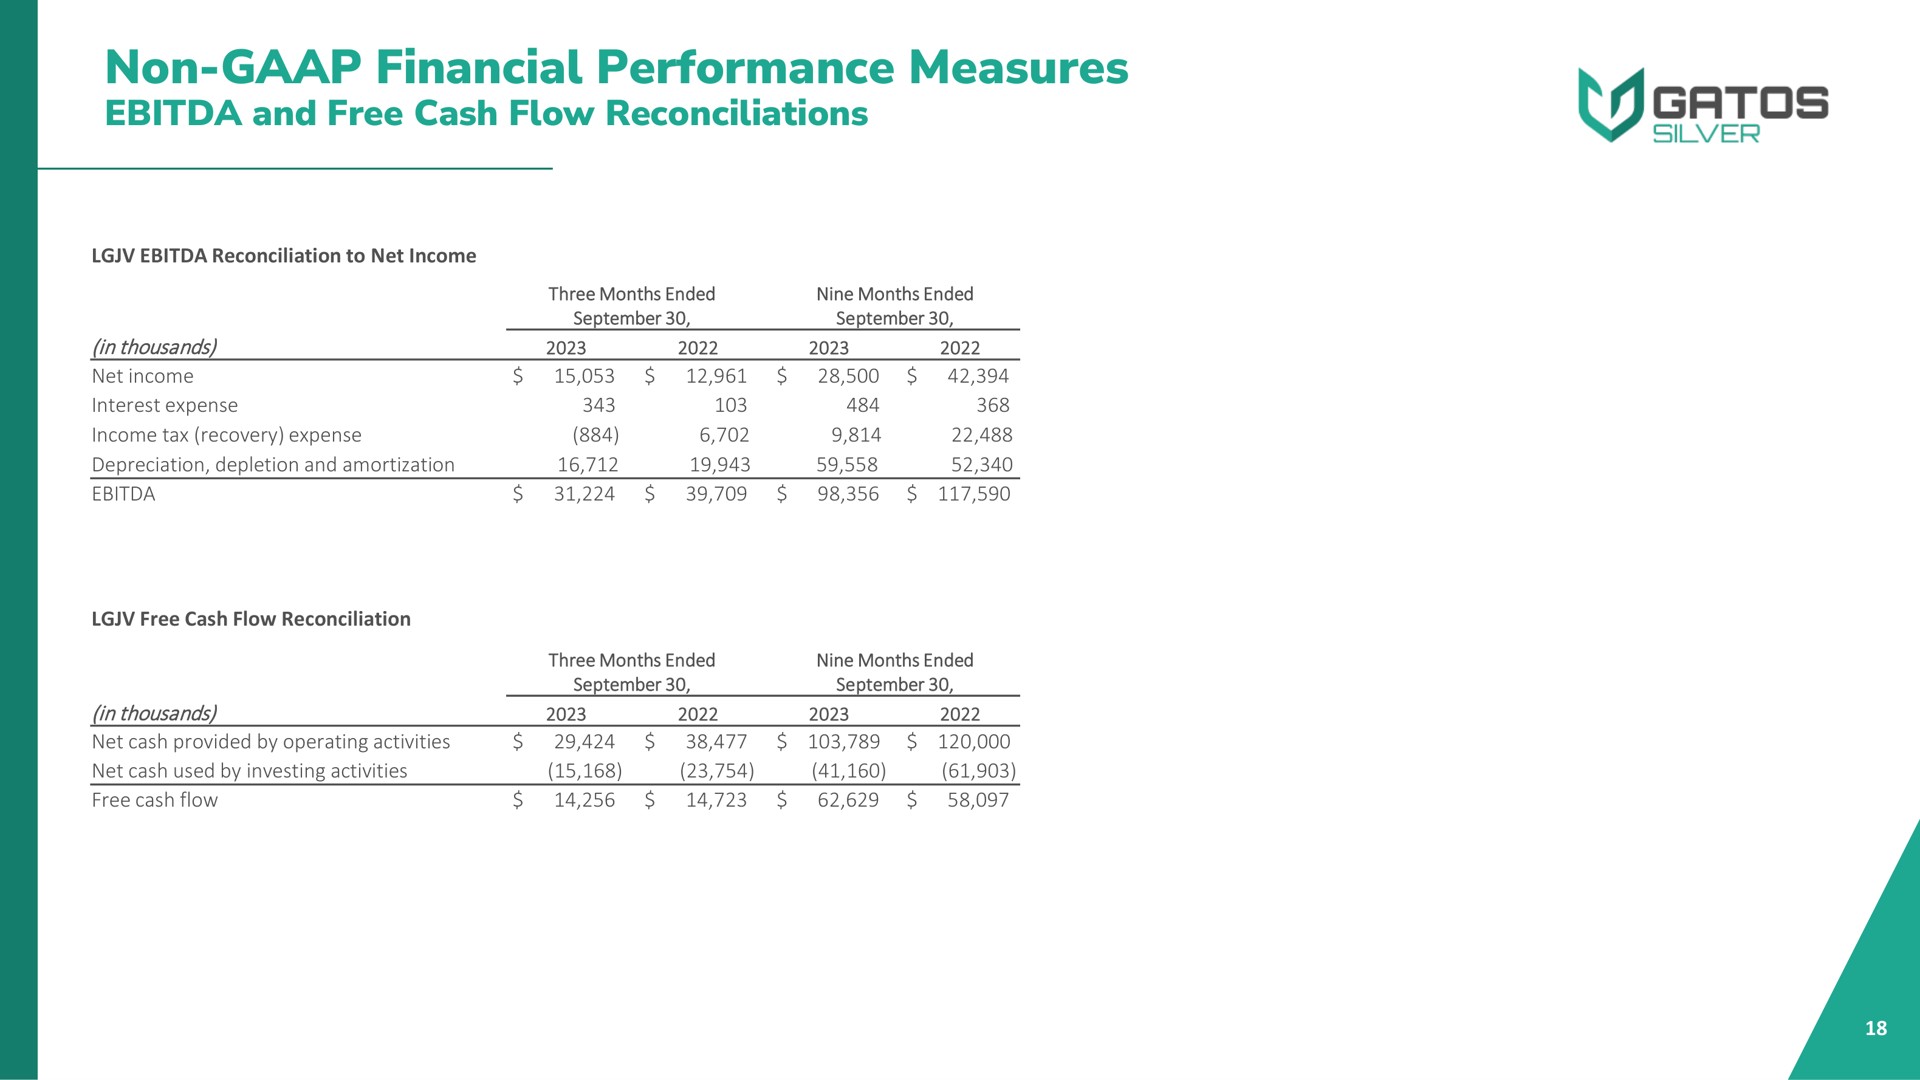 non financial performance measures and free cash flow reconciliations | Gatos Silver